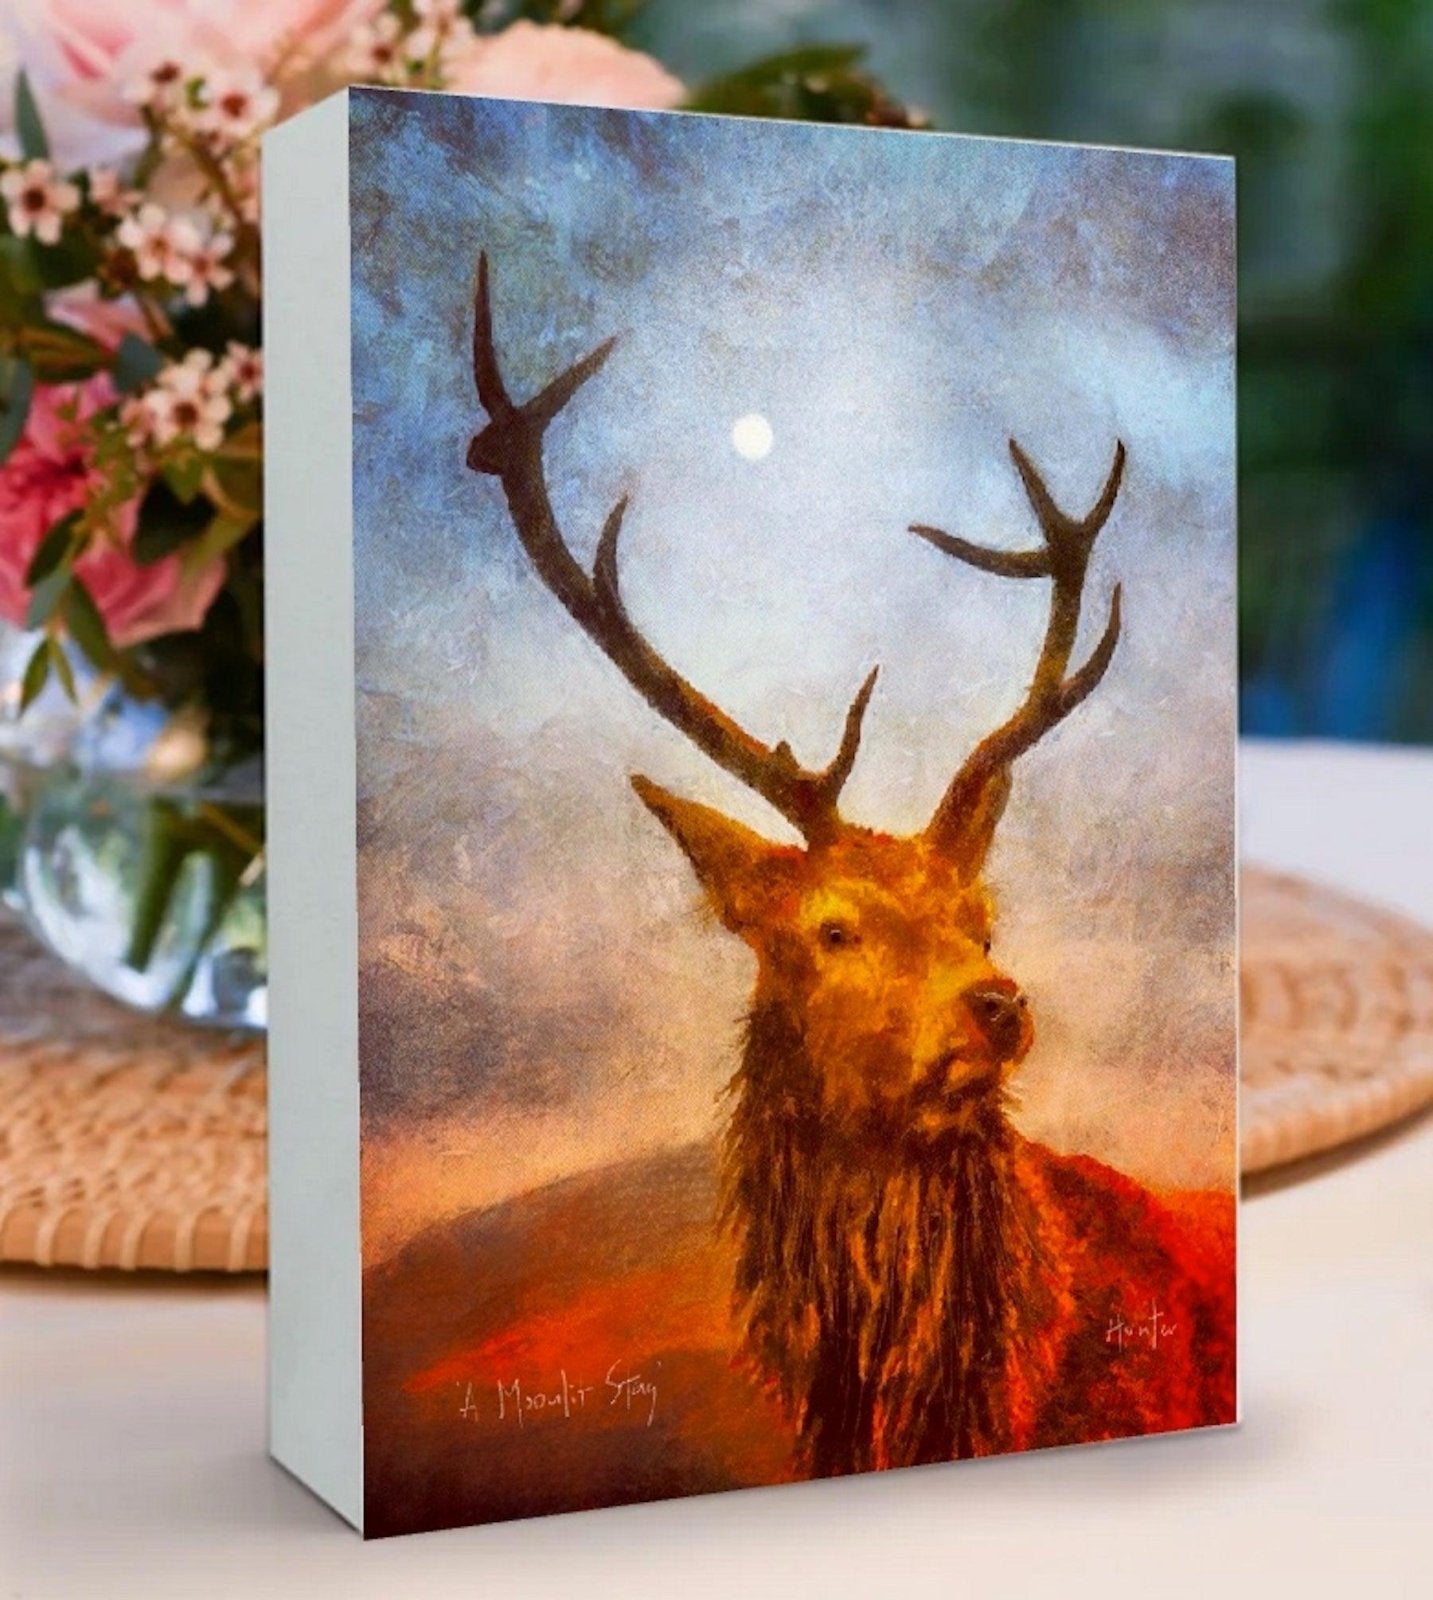 The Brooding Fairy Pools Skye Wooden Art Block-Wooden Art Blocks-Skye Art Gallery-Paintings, Prints, Homeware, Art Gifts From Scotland By Scottish Artist Kevin Hunter